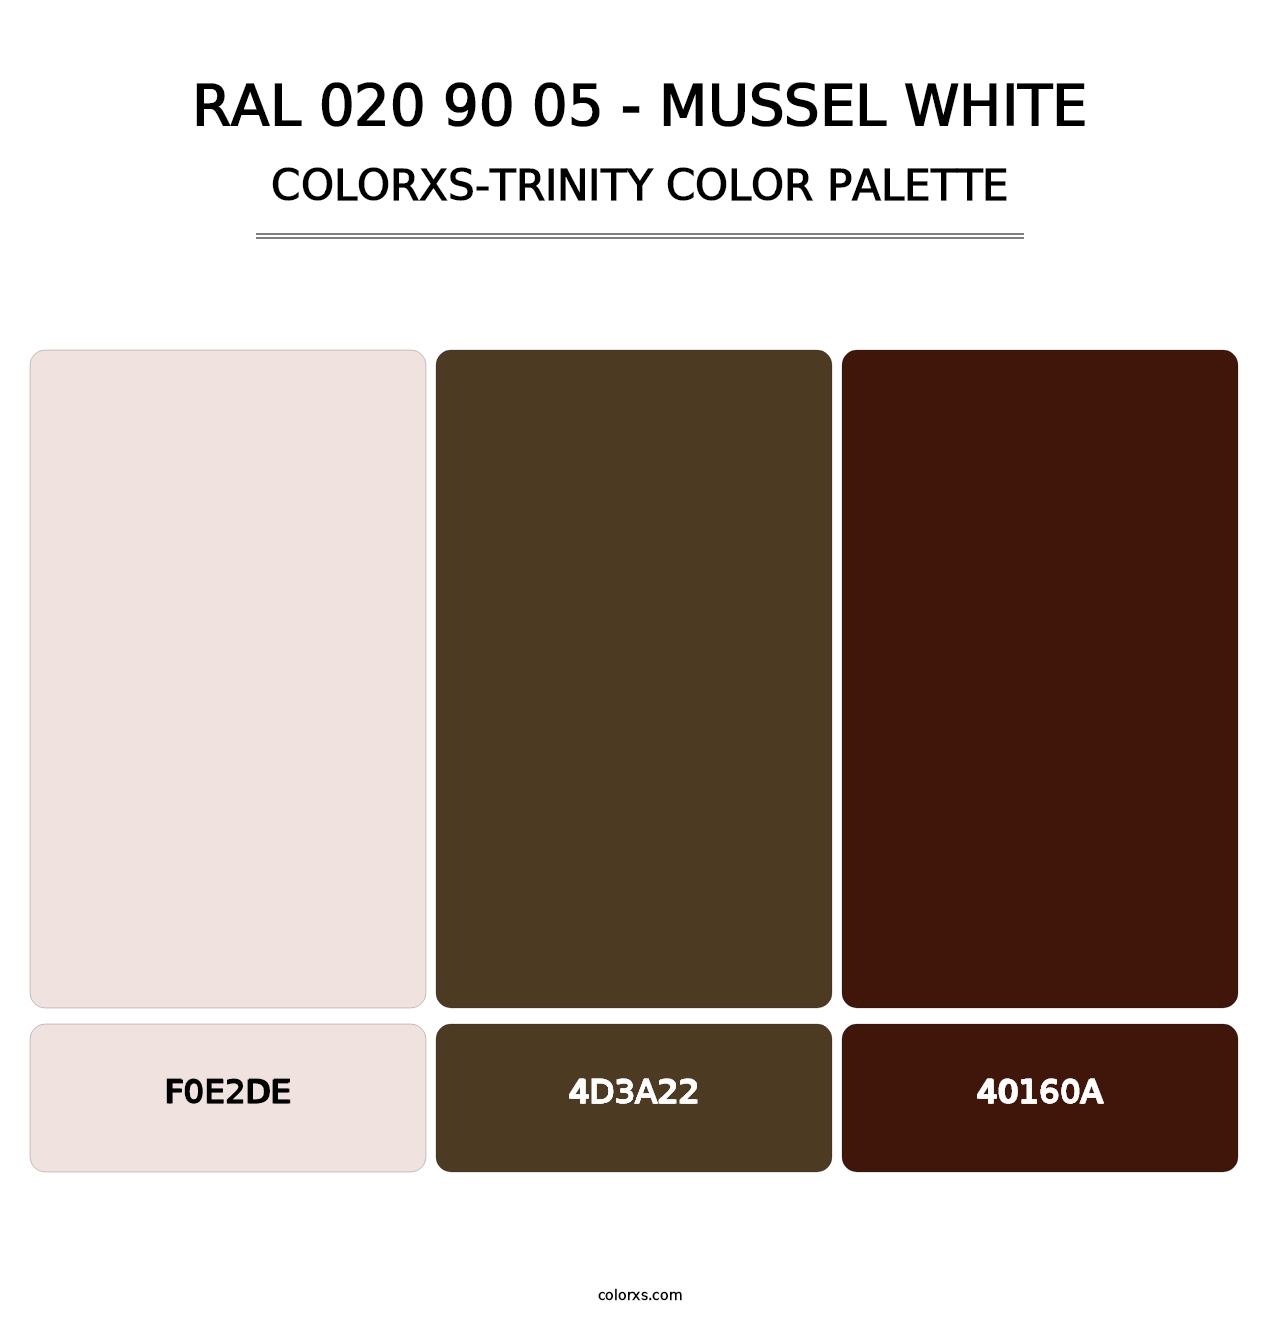 RAL 020 90 05 - Mussel White - Colorxs Trinity Palette